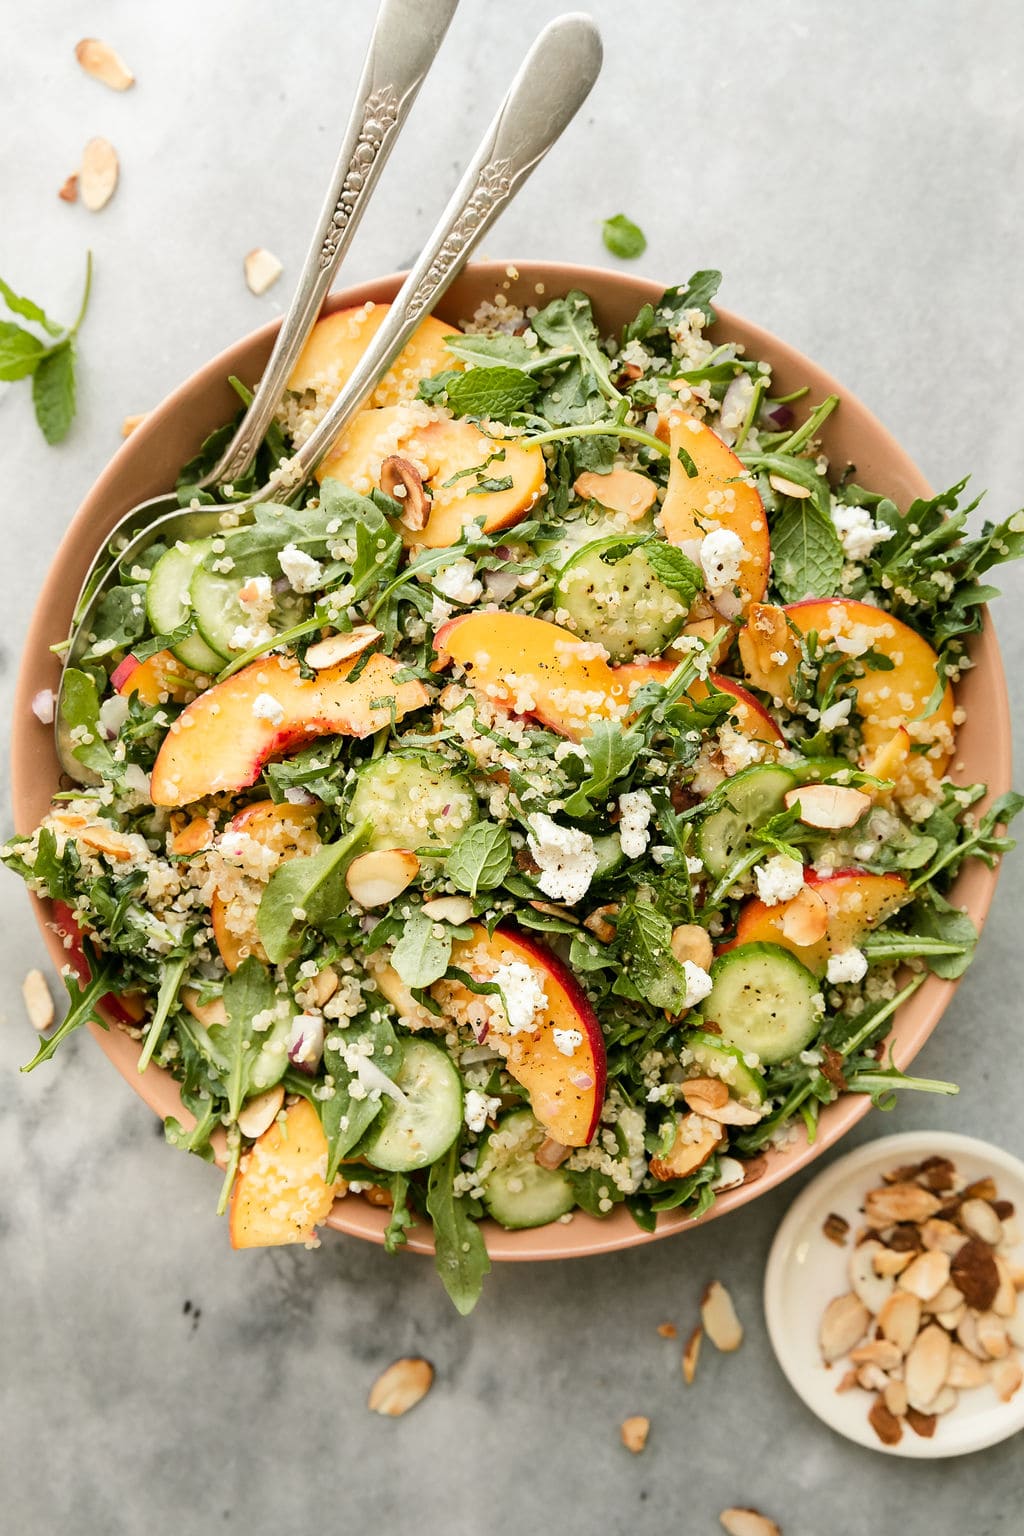 Overhead view quinoa arugula salad with peaches and goat cheese crumbles in pink bowl.